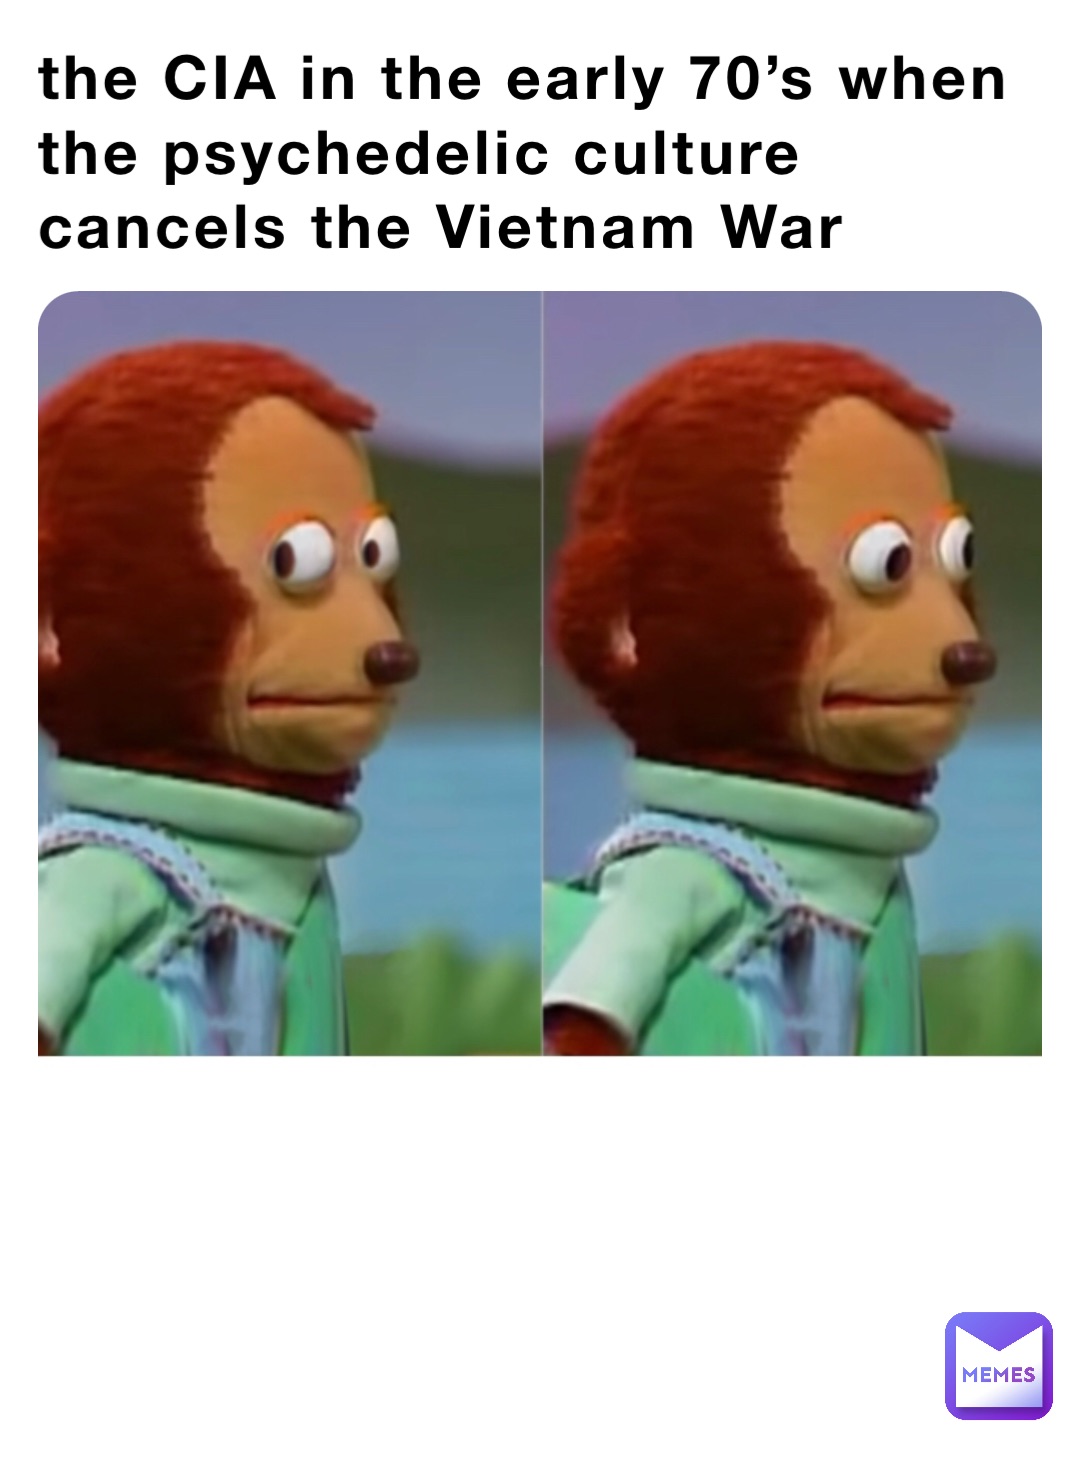 the CIA in the early 70’s when the psychedelic culture cancels the Vietnam War